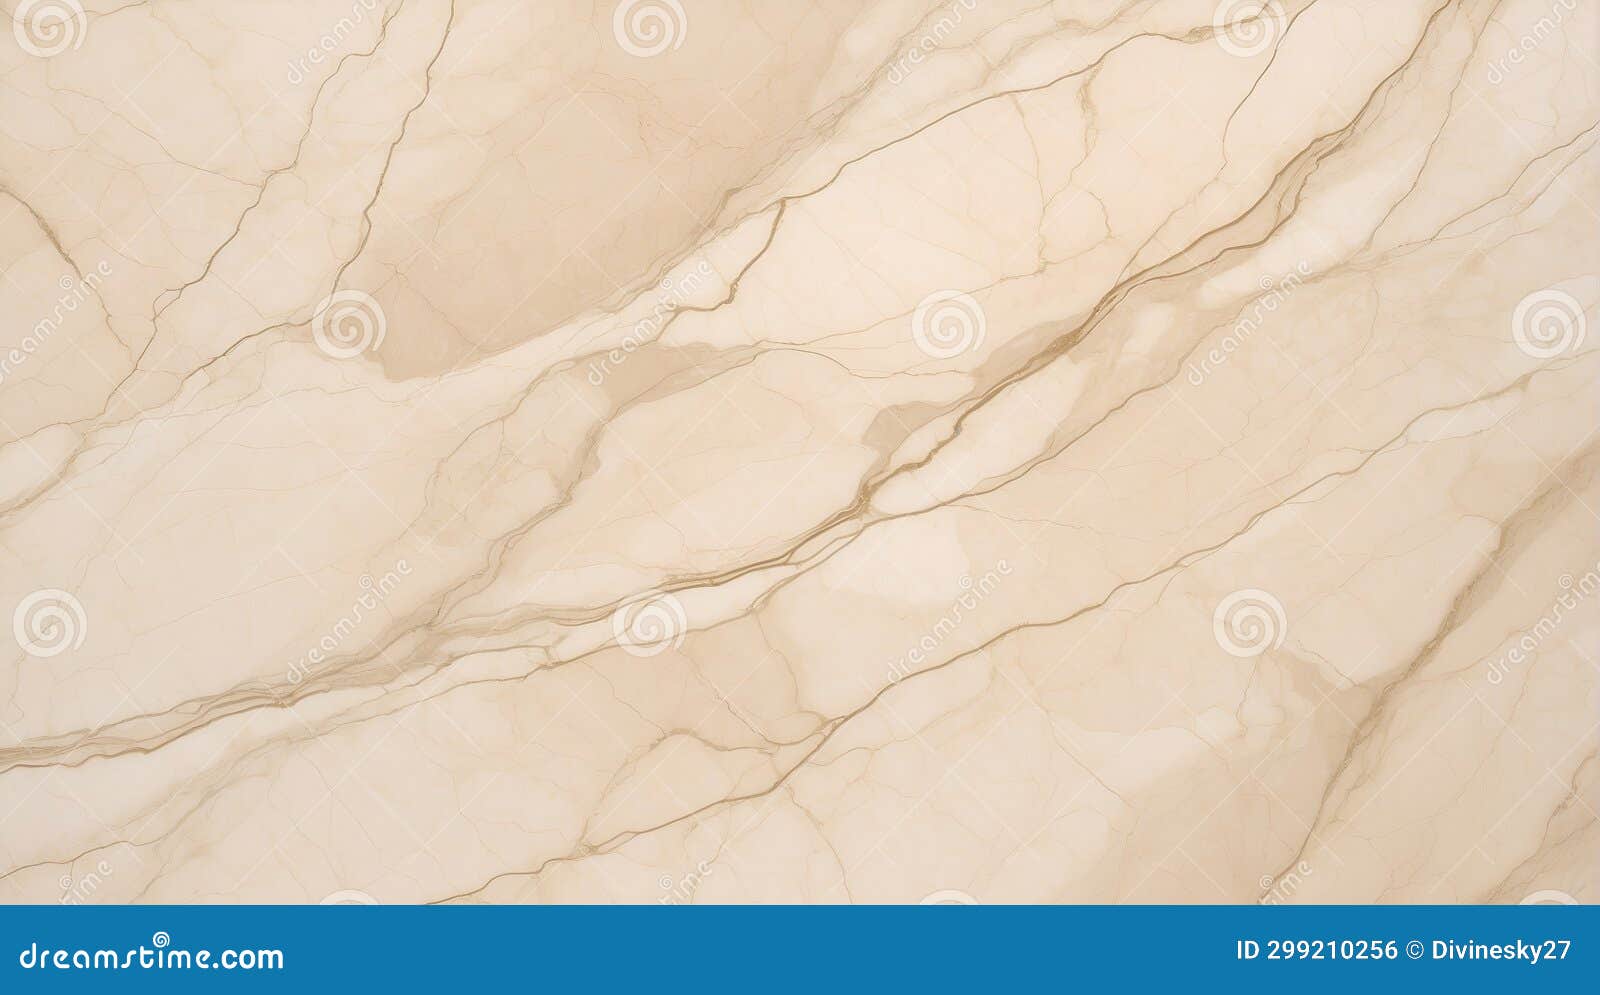 creamy serenity: crema marfil marble's subtle veined beauty. ai generate